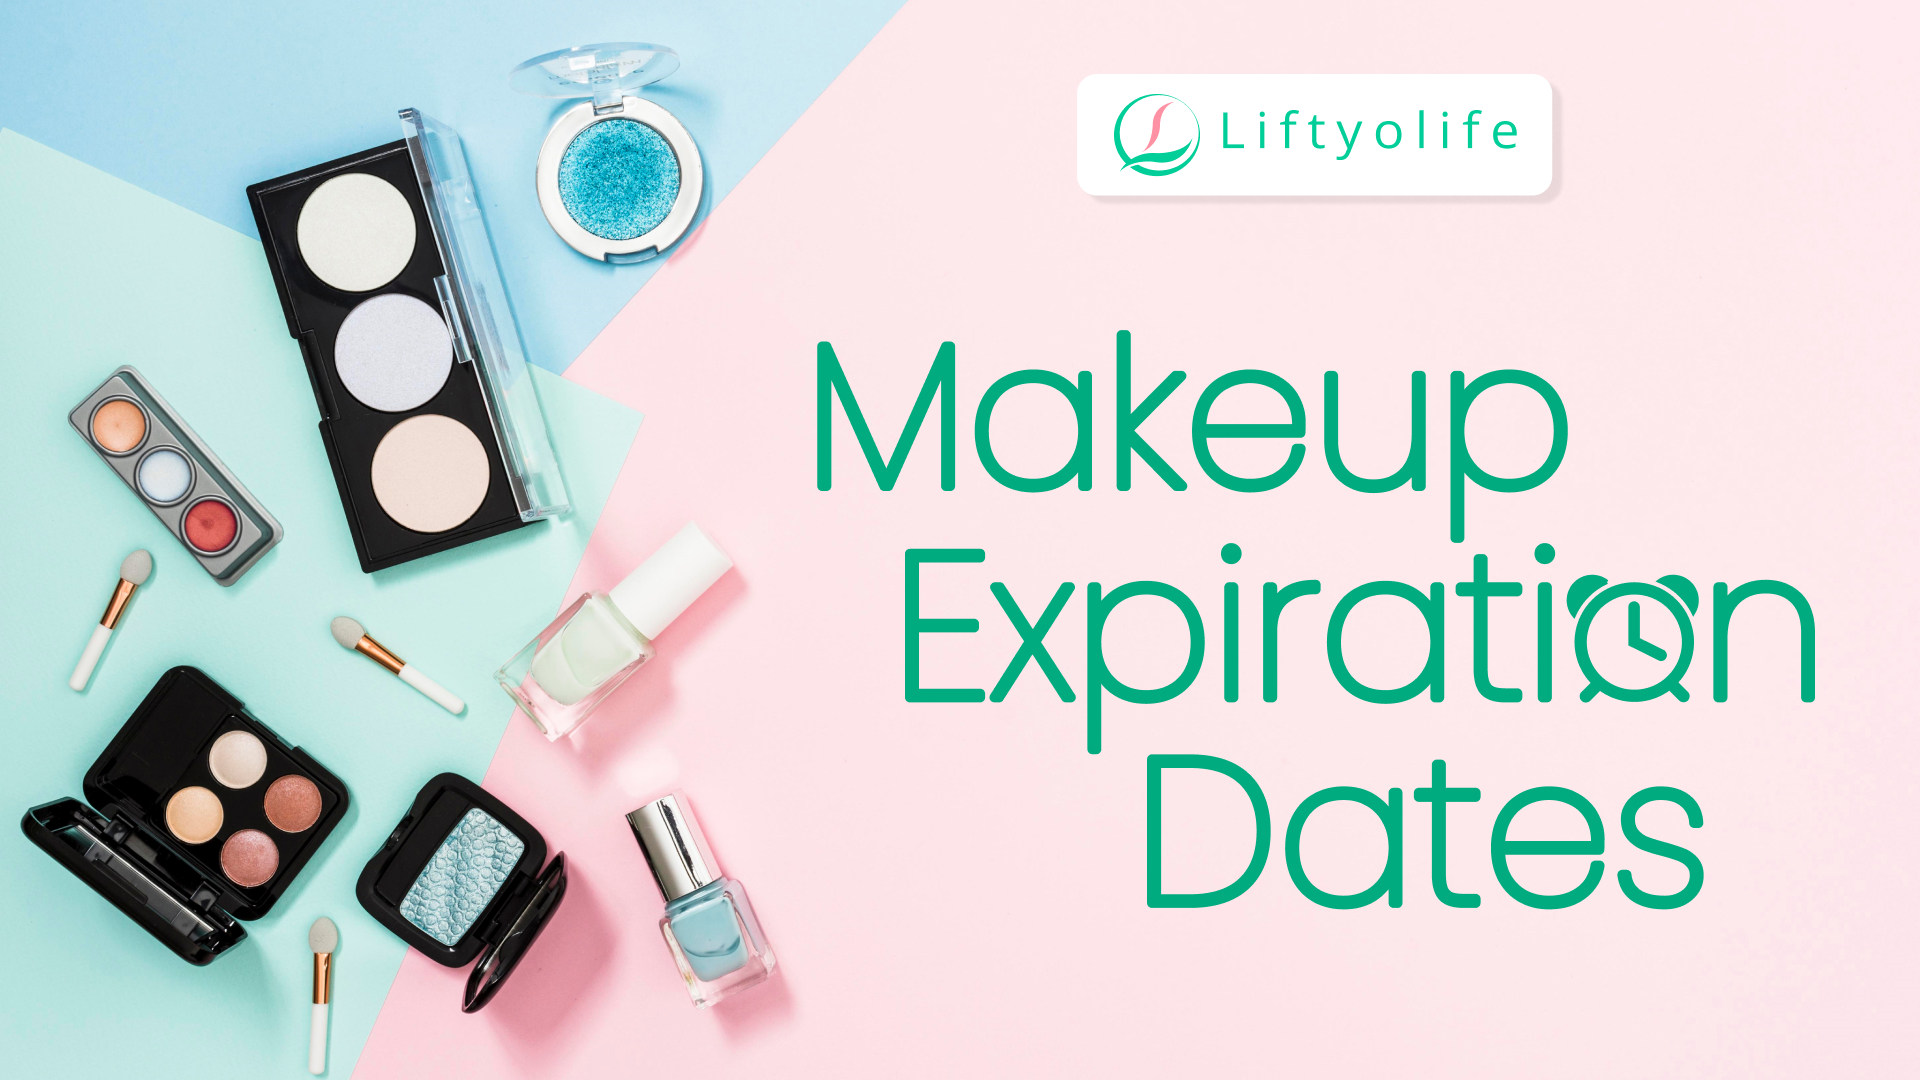 Does Makeup Expire?